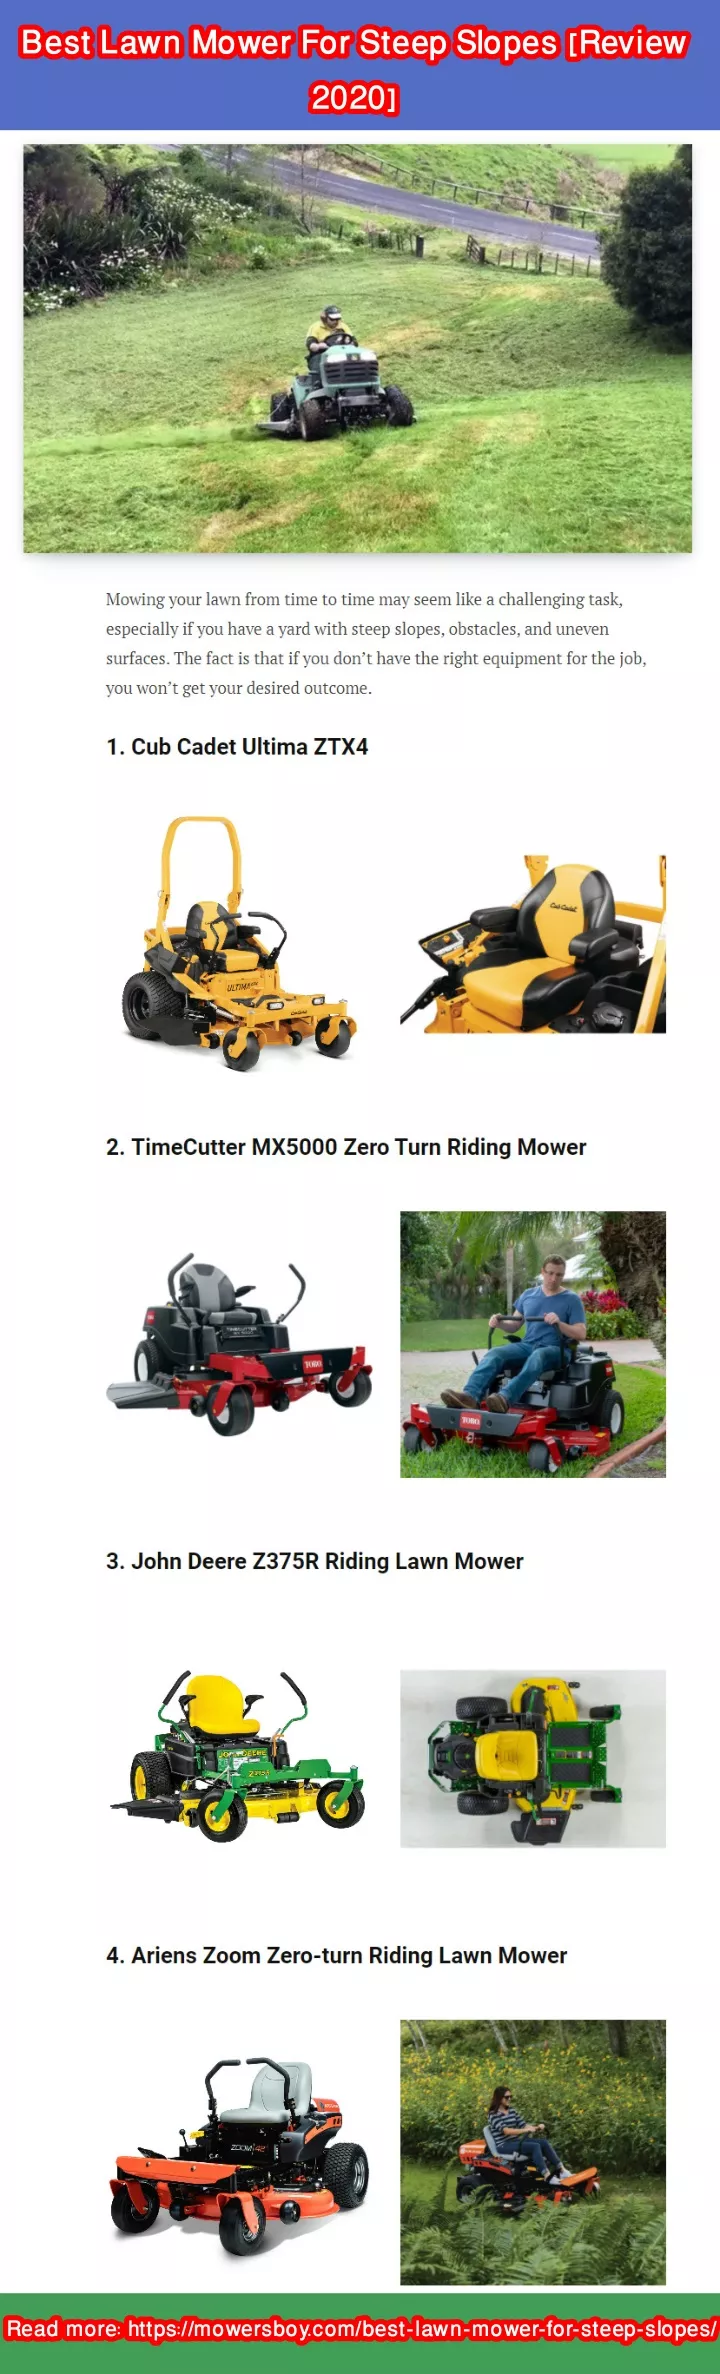 best lawn mower for steep slopes review 2020